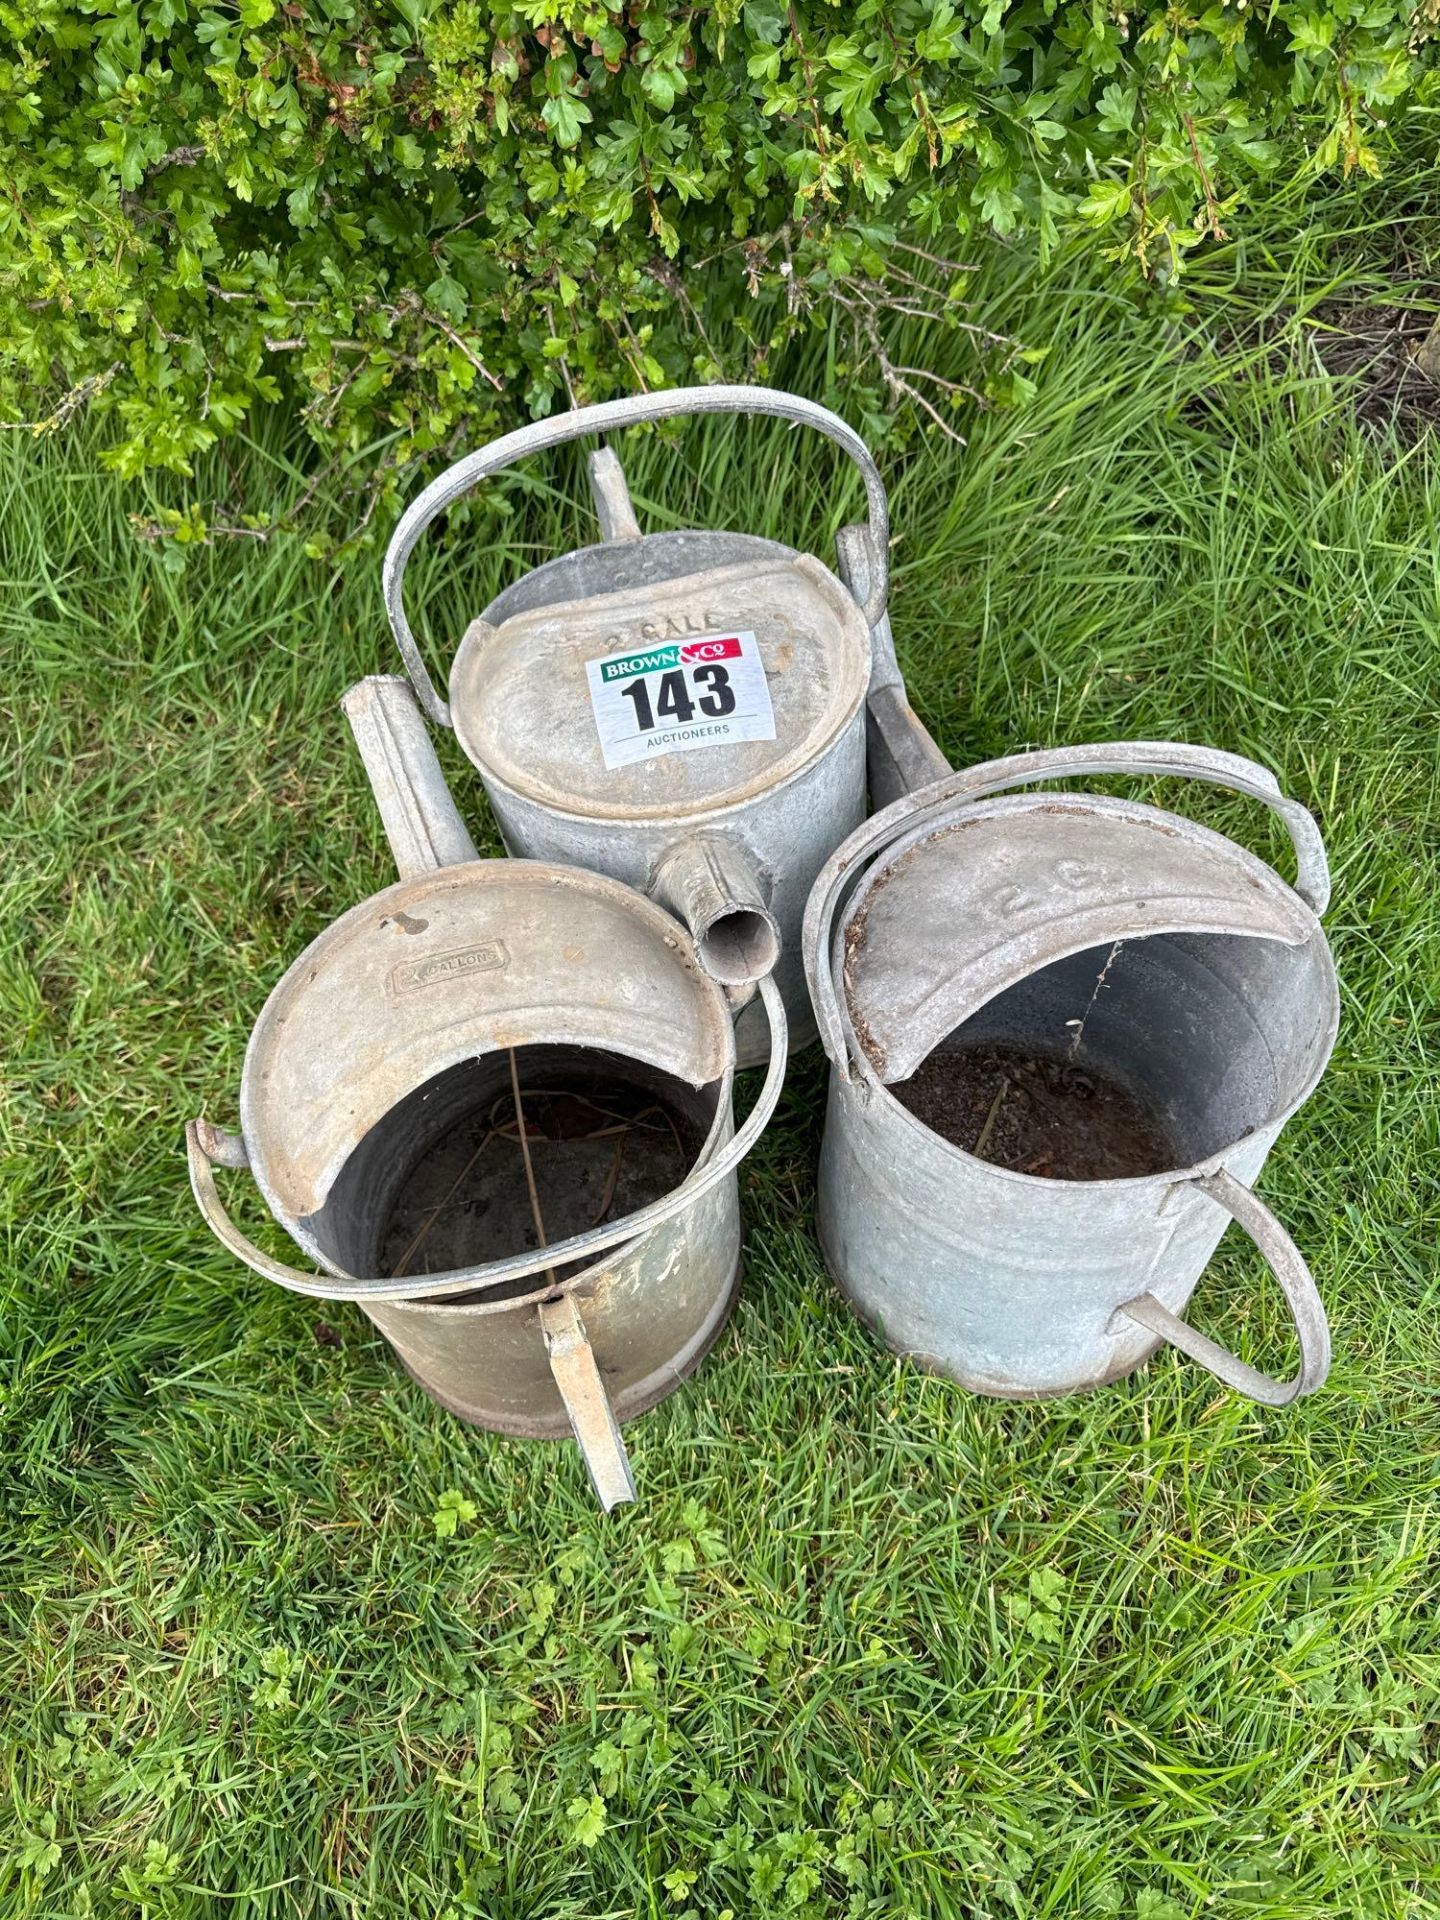 3No watering cans